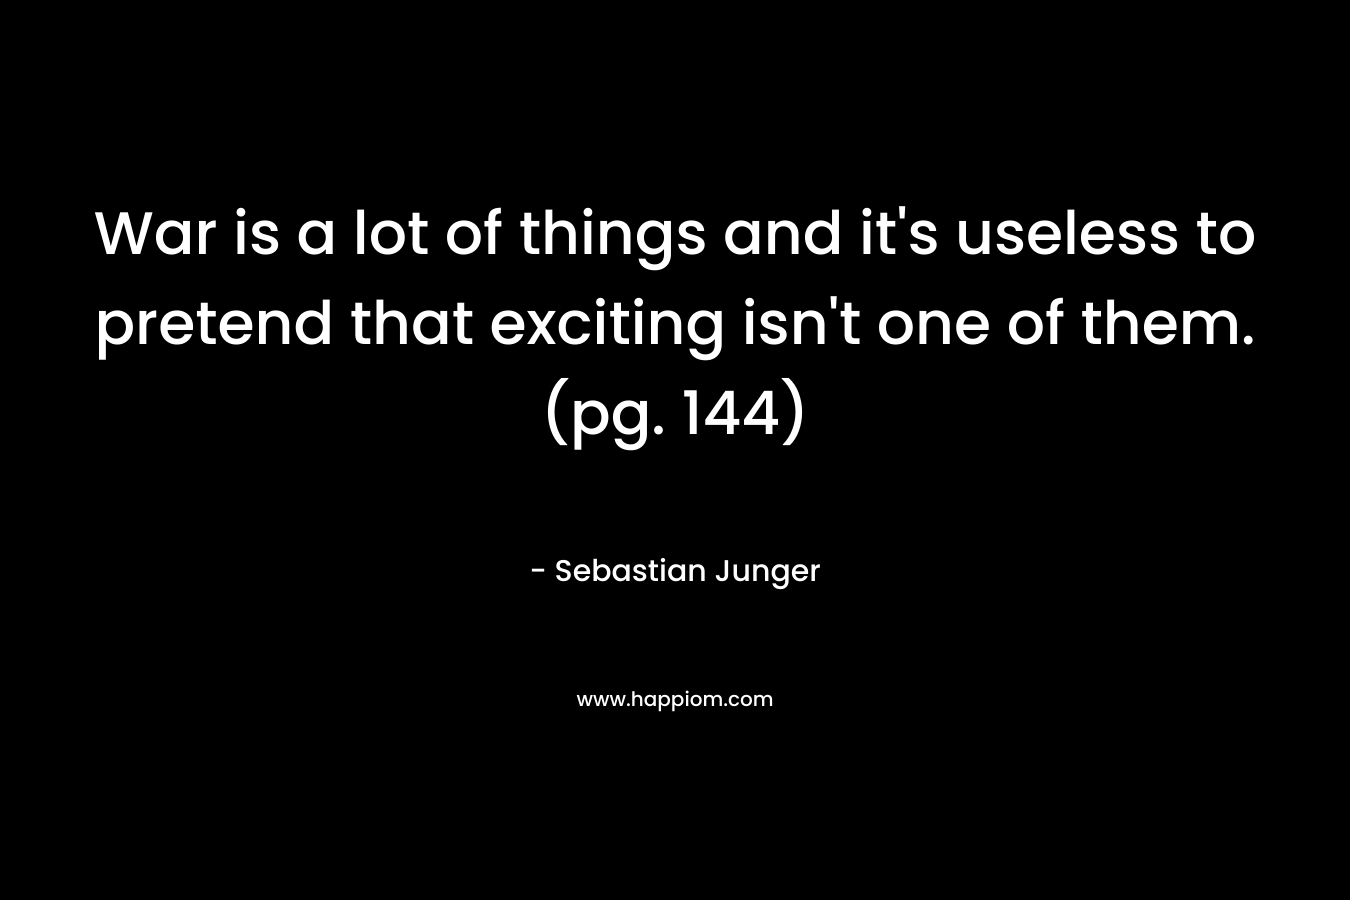 War is a lot of things and it’s useless to pretend that exciting isn’t one of them. (pg. 144) – Sebastian Junger